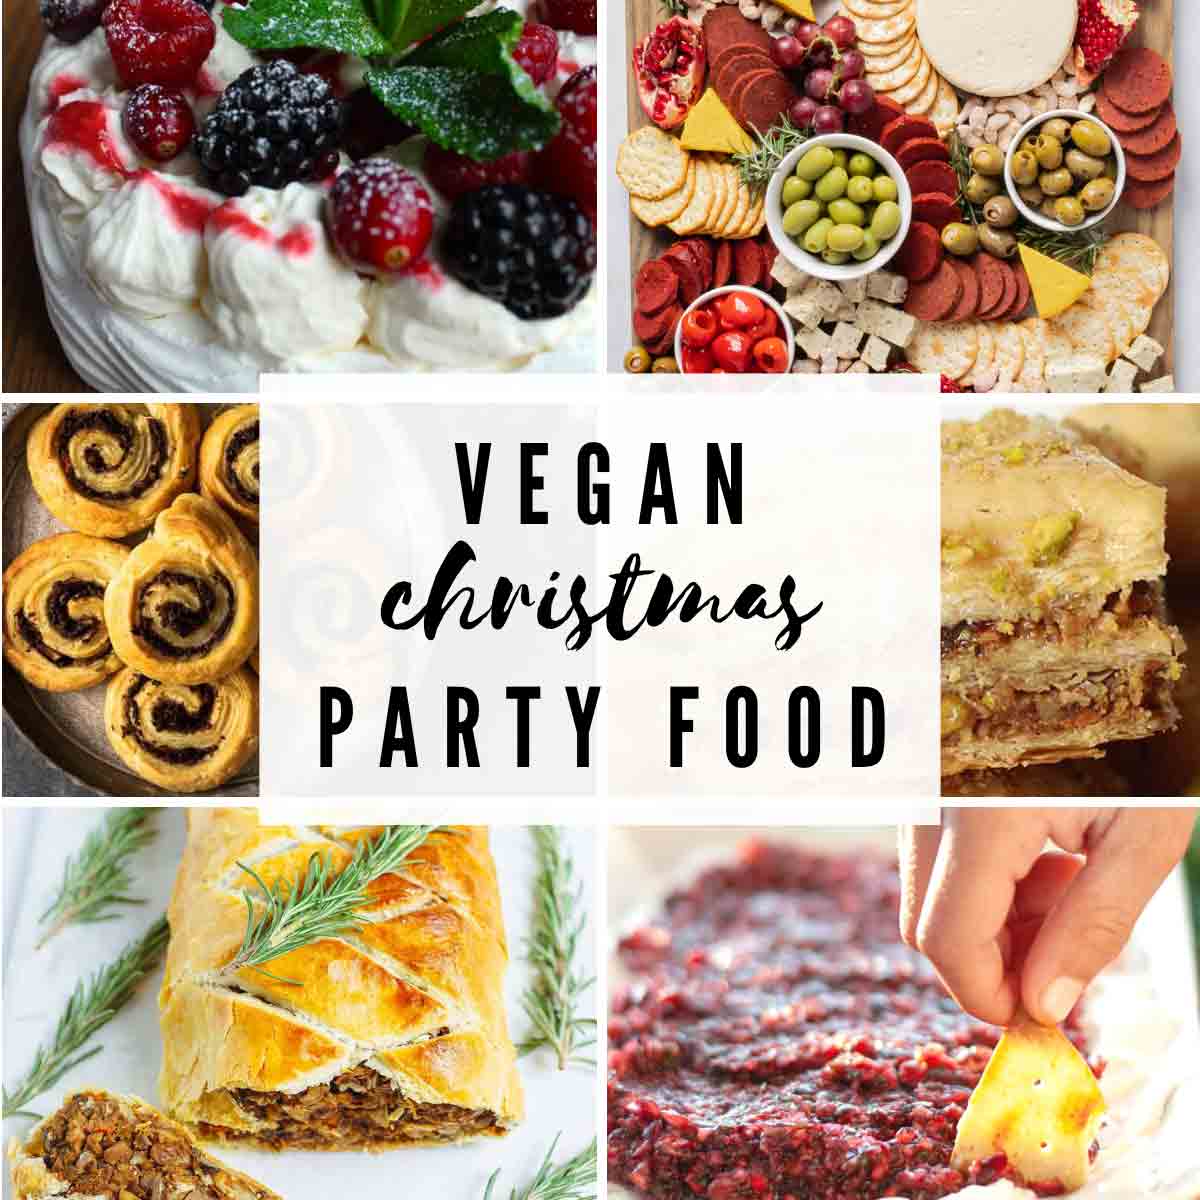 Image Collage With Text Overlay That Reads 'vegan Christmas Party Food'